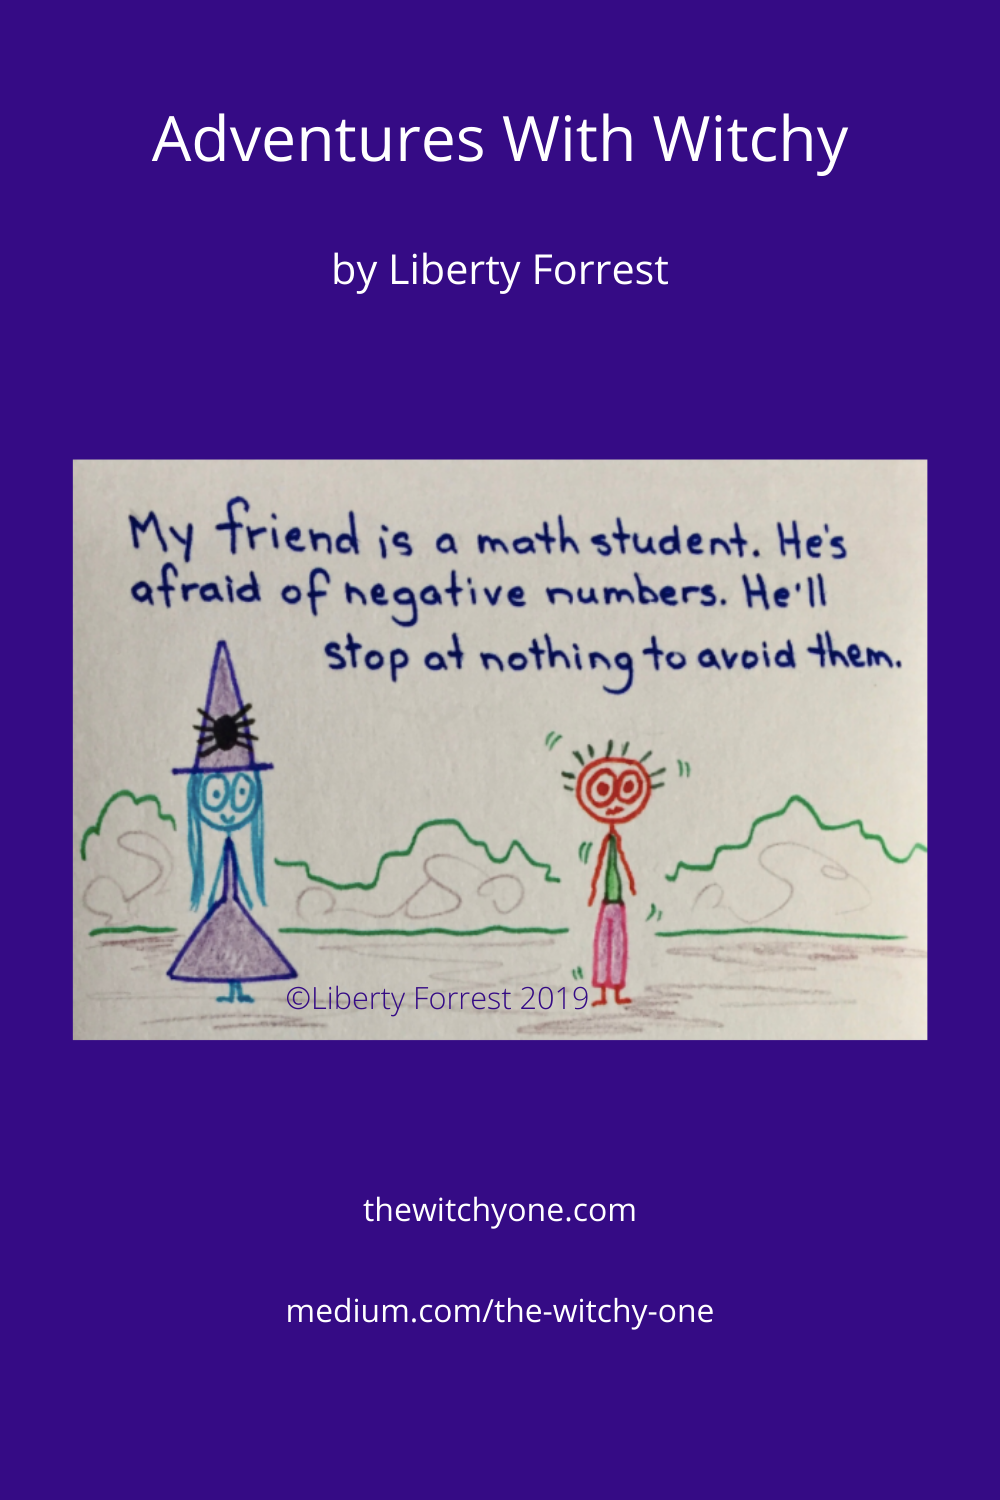 cartoon witchy with friend. She says “my friend is a math student. He’s afraid of negative numbers. He’ll stop at nothing to avoid them.”